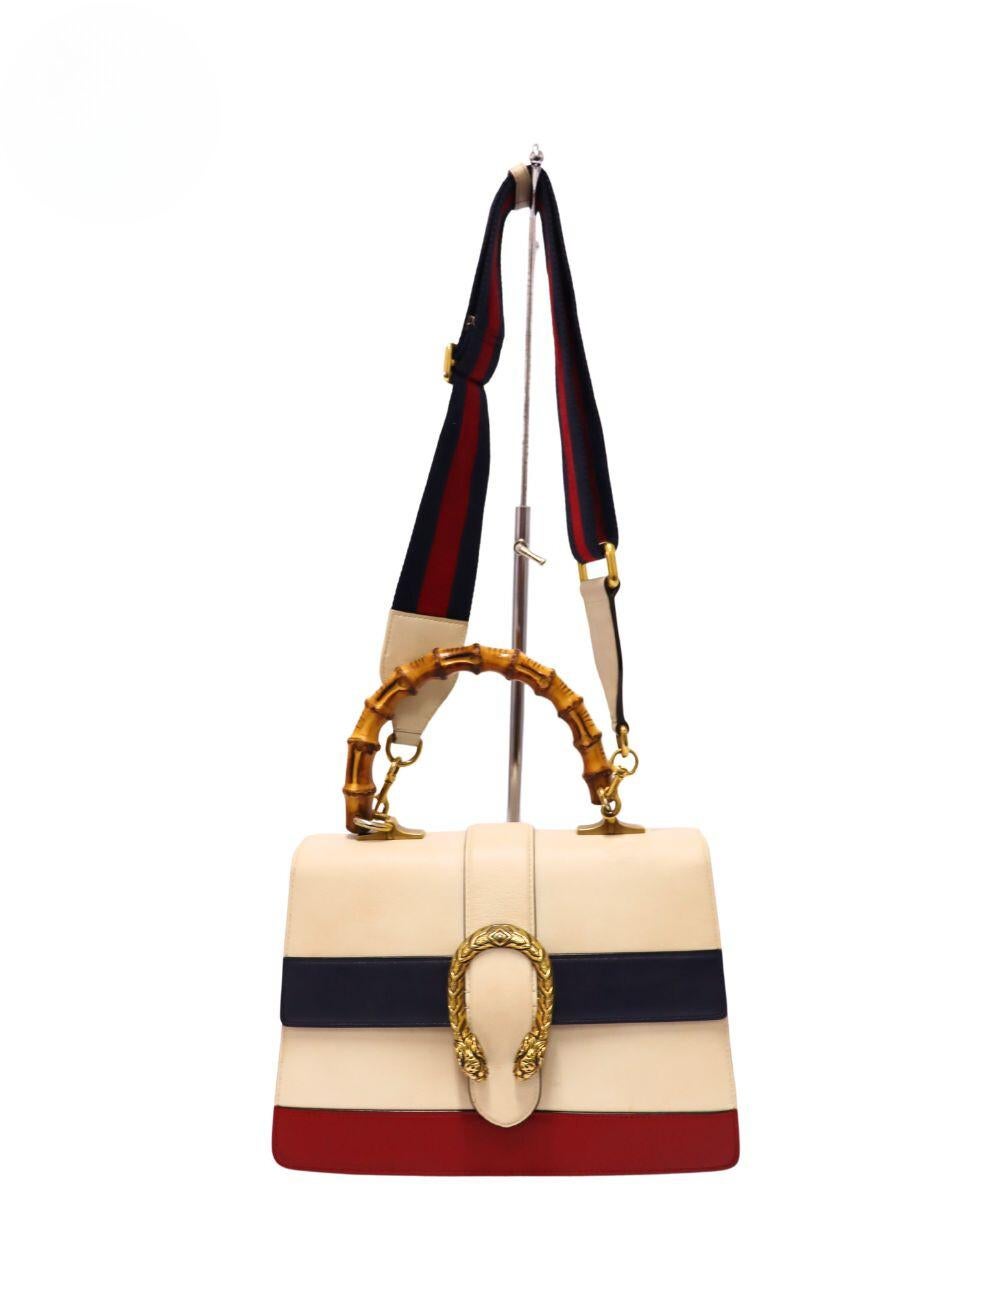 Gucci Tricolor Dionysus Bamboo Top Handle Bag, Features tiger head, flap closure, bamboo handle, removable shoulder strap, one interior pocket and inspired by the Greek God Dionysus.

Material: Leather
Hardware: Gold
Height: 18.5cm
Width: